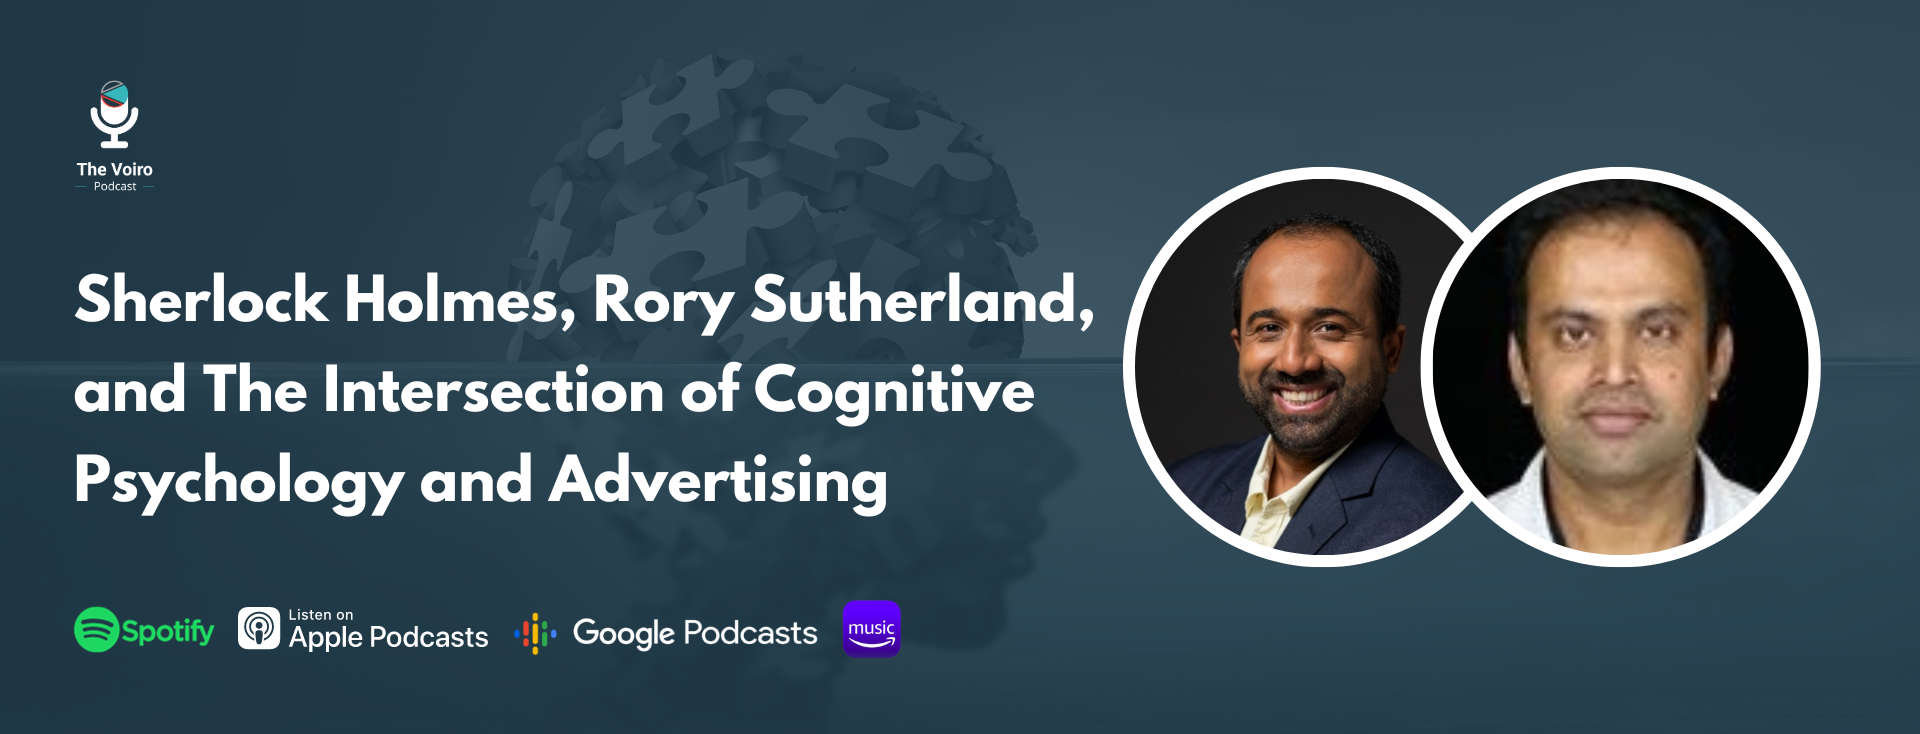 Sherlock Holmes, Rory Sutherland, and The Intersection of Cognitive Psychology and Advertising